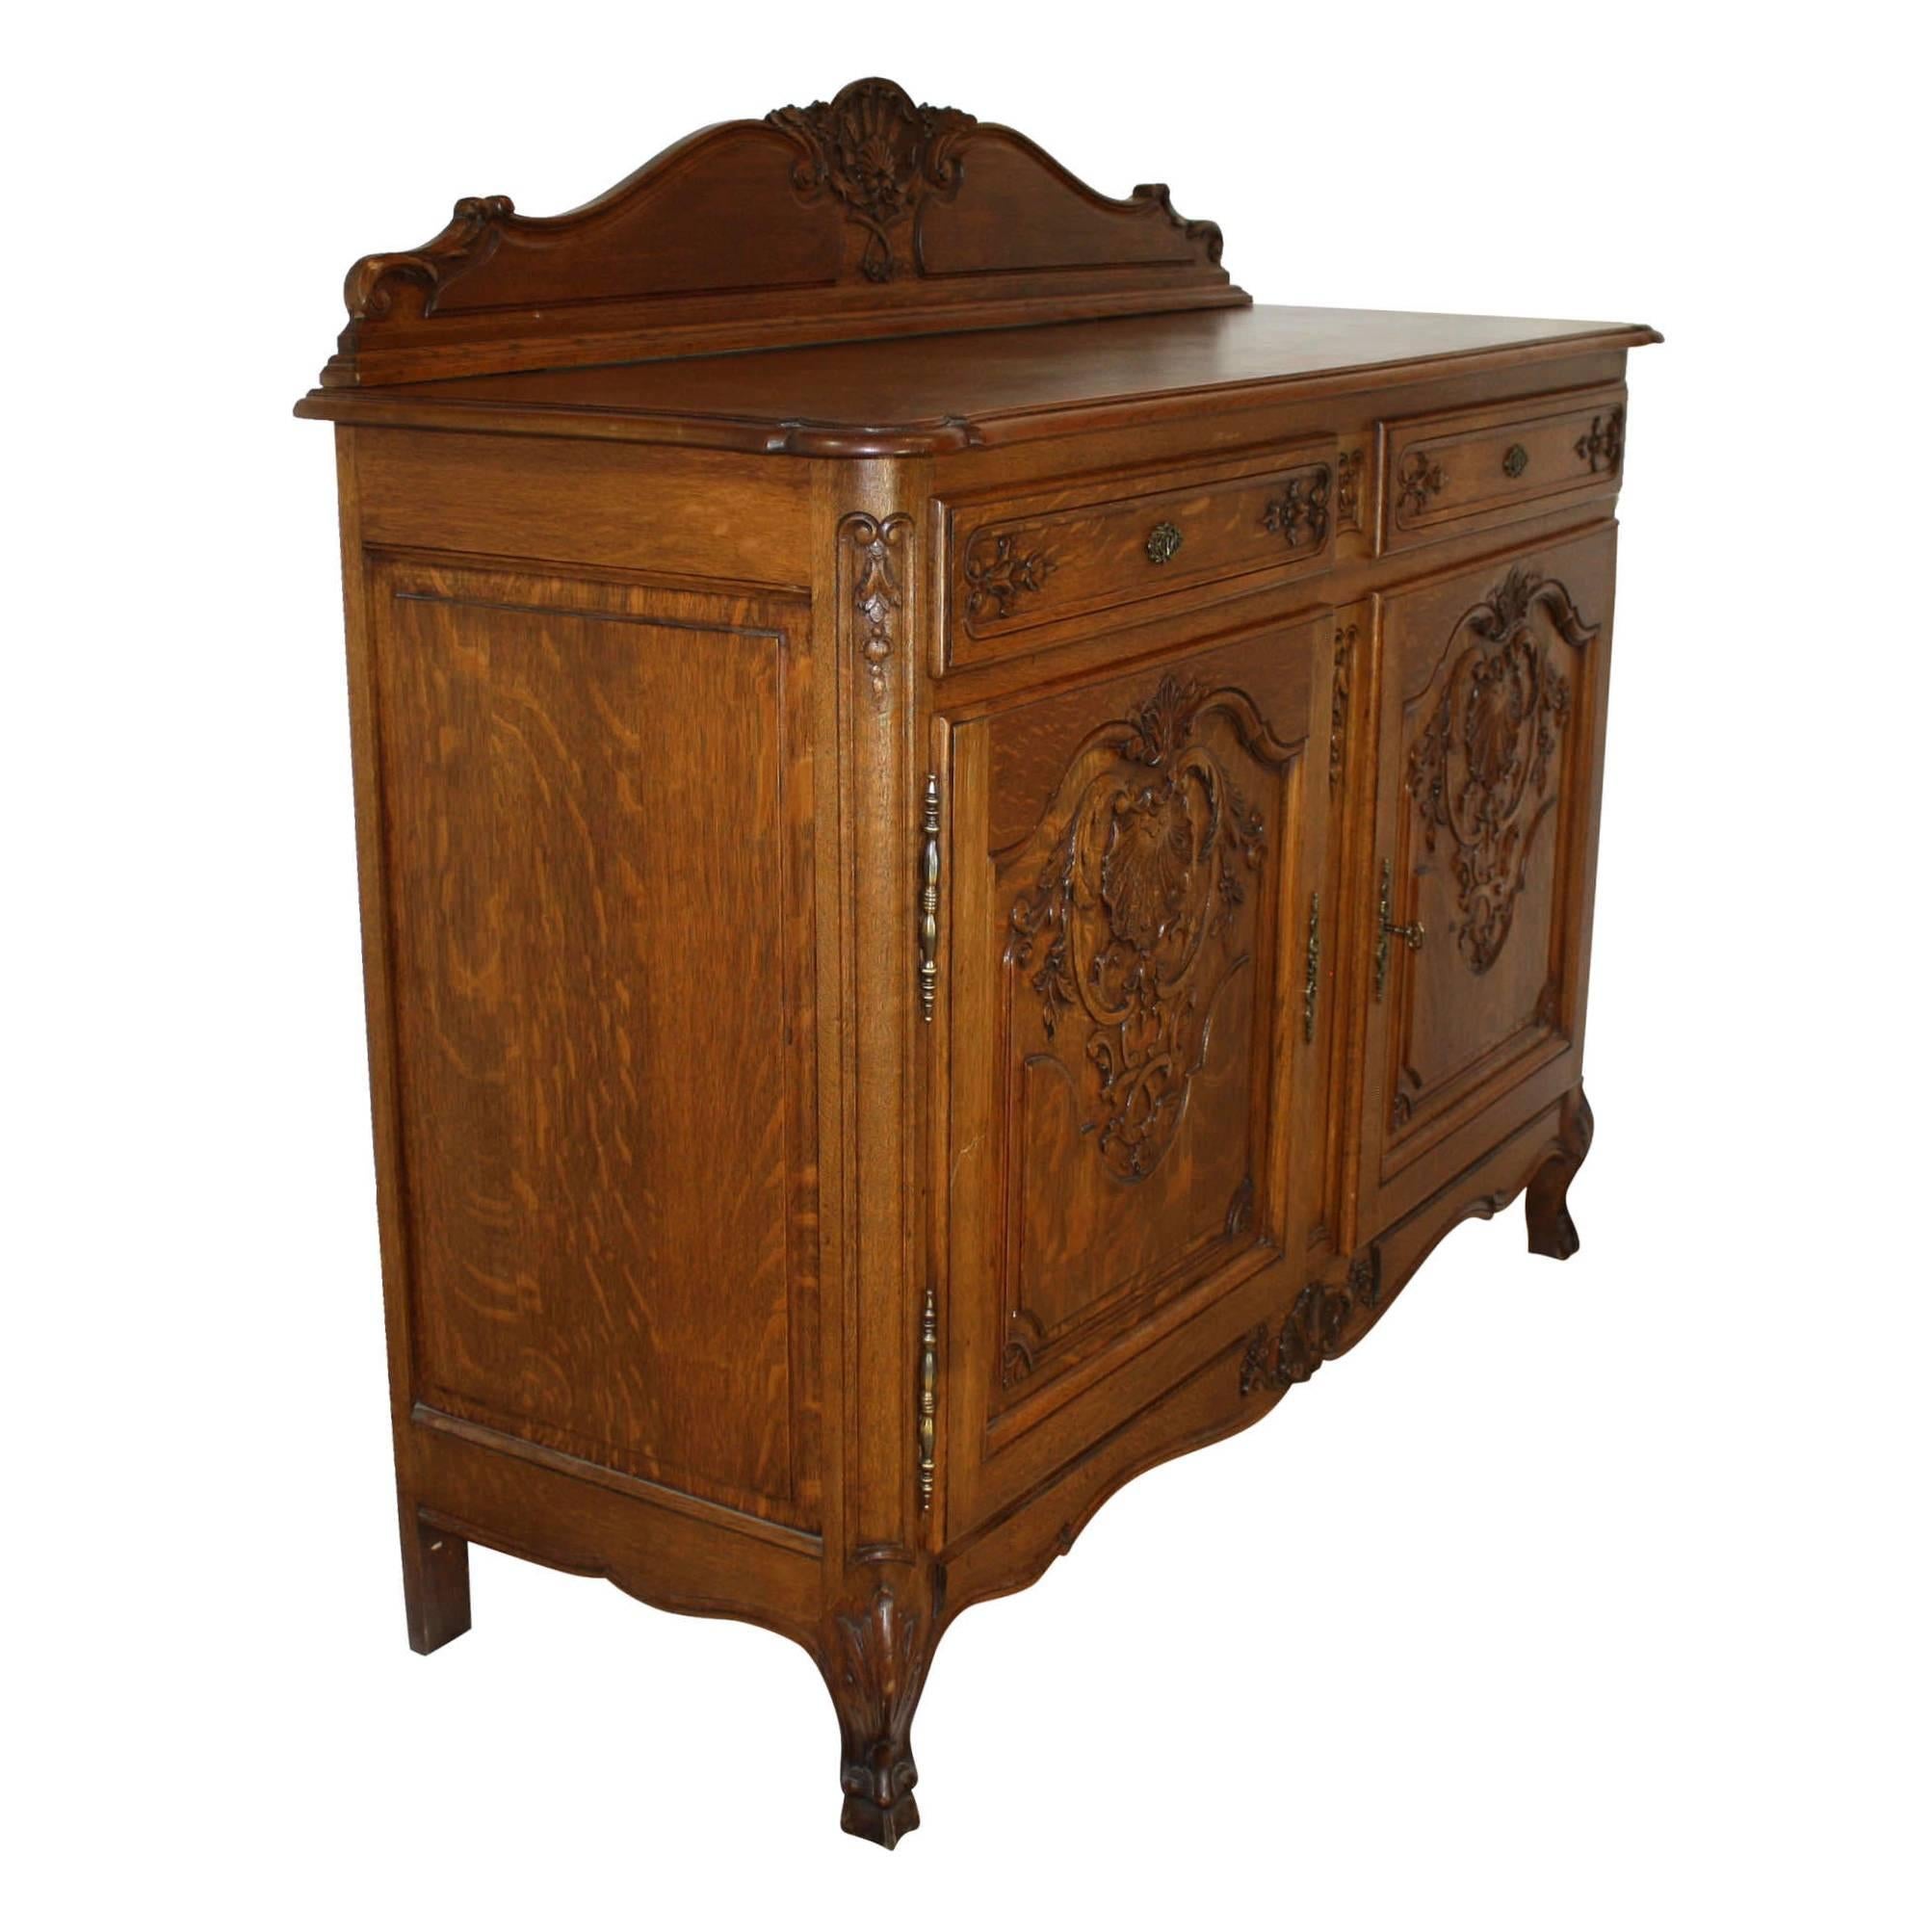 Fine craftsmanship and high quality, quarter sawn oak with pronounced medullary rays are showcased on this stunning Louis XV server. The server features beautiful shell and floral carvings on a scalloped backboard, apron, double drawers, and a pair